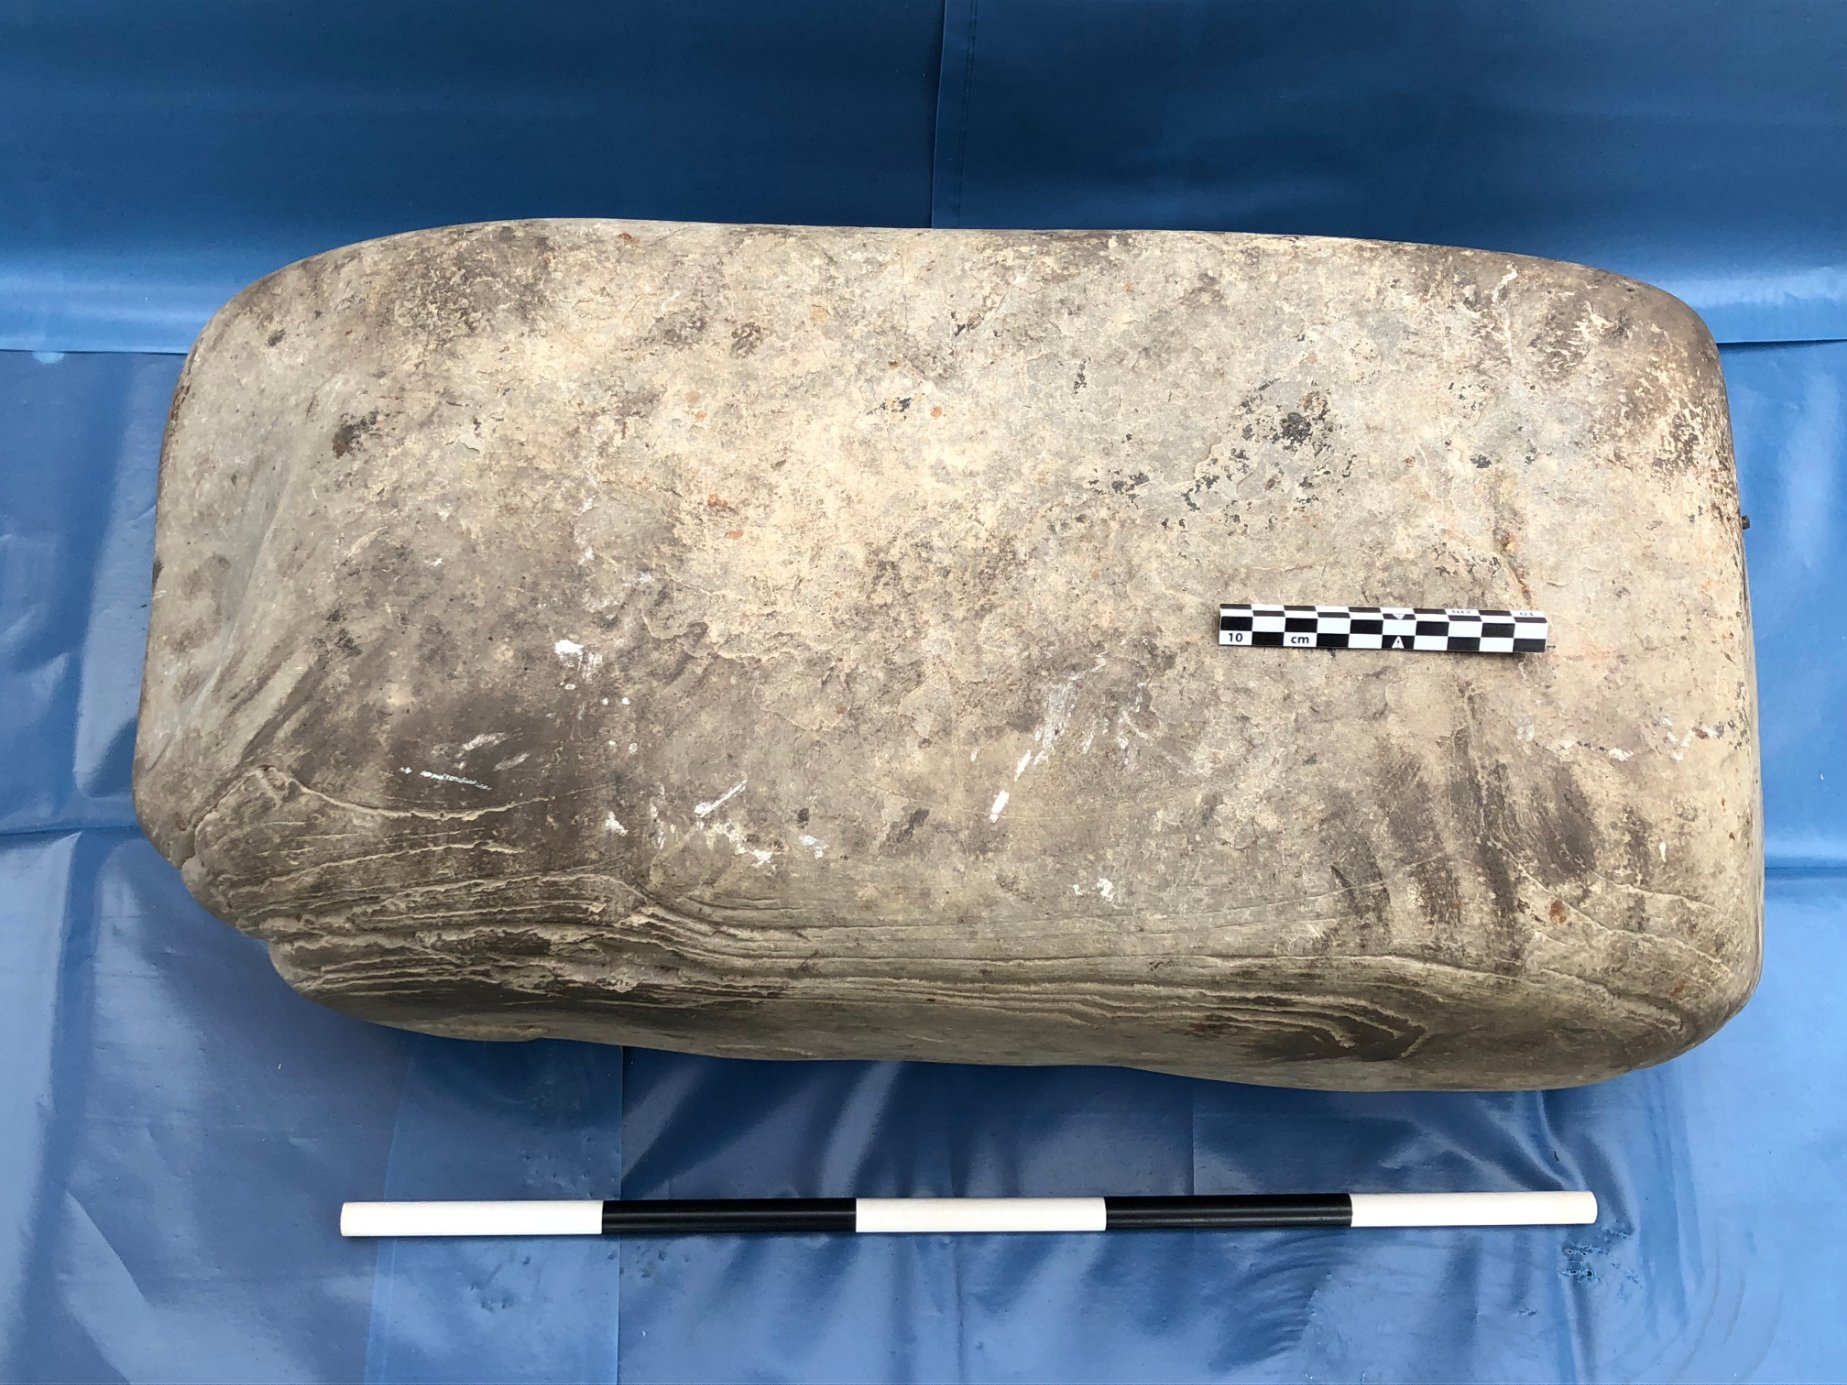 The Pictish anvil stone, complete with hand-print of the smith, recovered last year. Image courtesy Swandro Trust